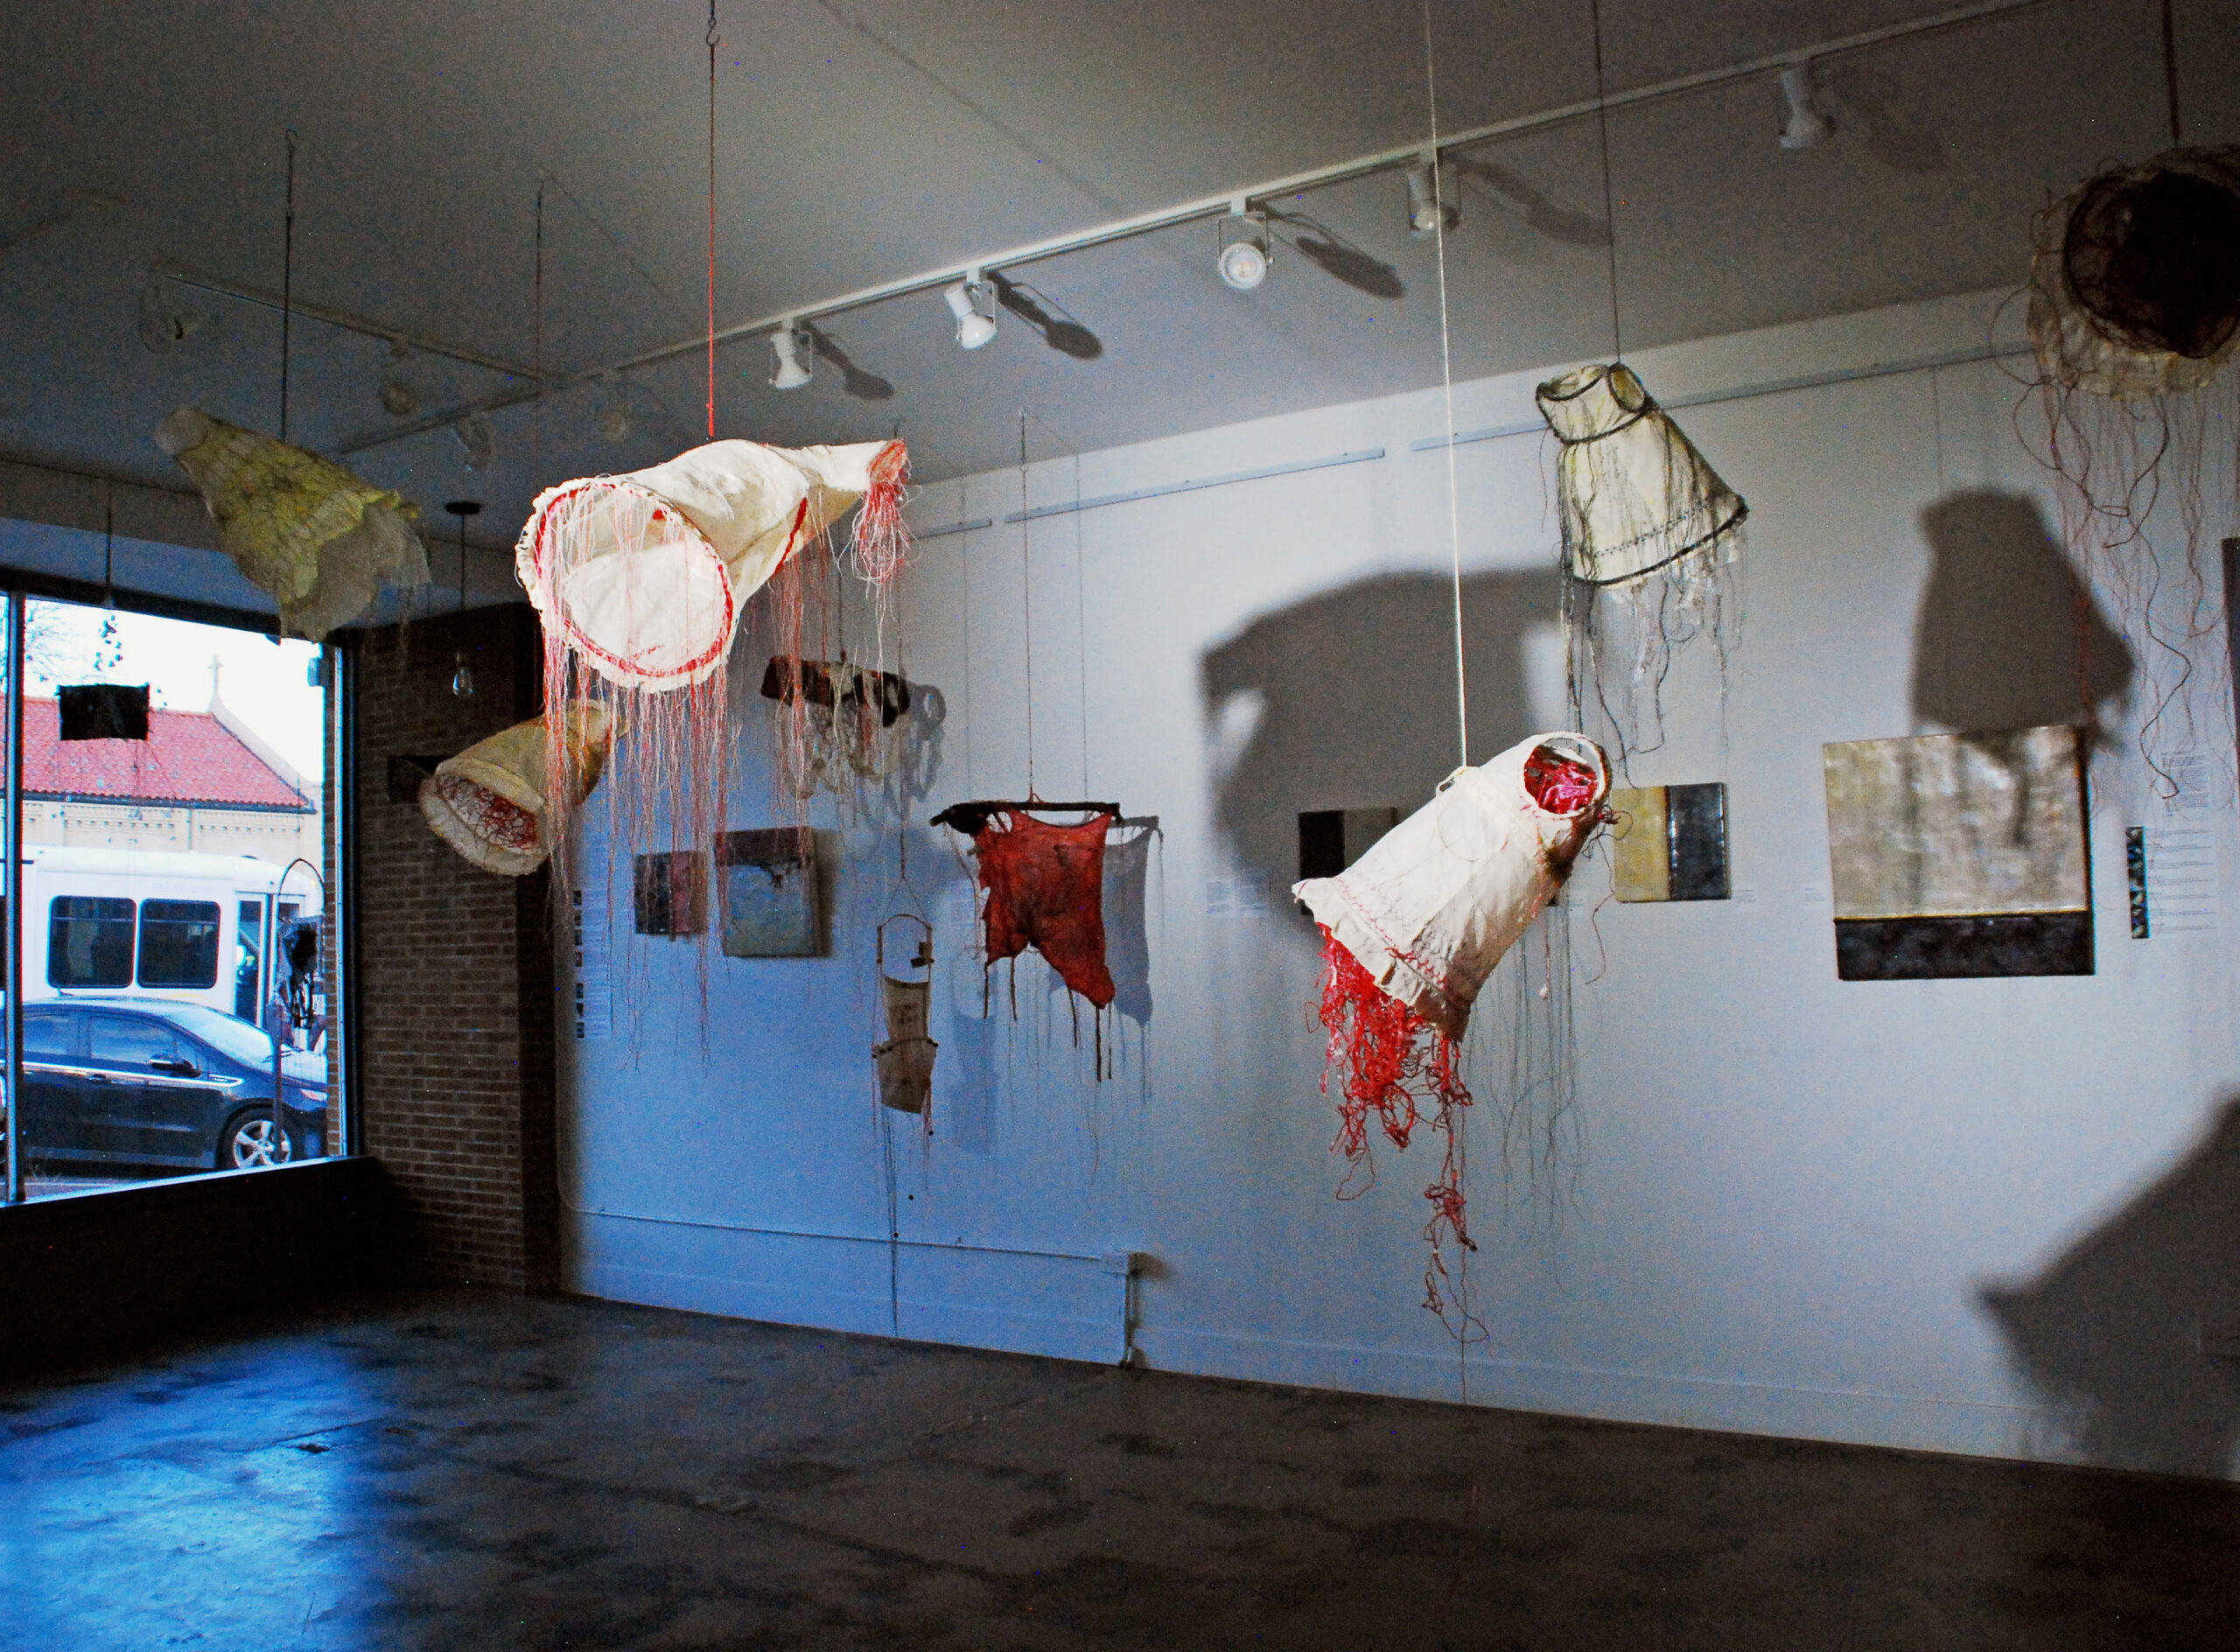 FLIGHT OF THE INNOCENTS, Installation view, from the “The Clothes We Wear” Exhibition, Kreuser Gallery.This installation of seven suspended sculptures conceptualizes the impact of climate change on women and children forced to flee from homelands impacted by drought and flood.